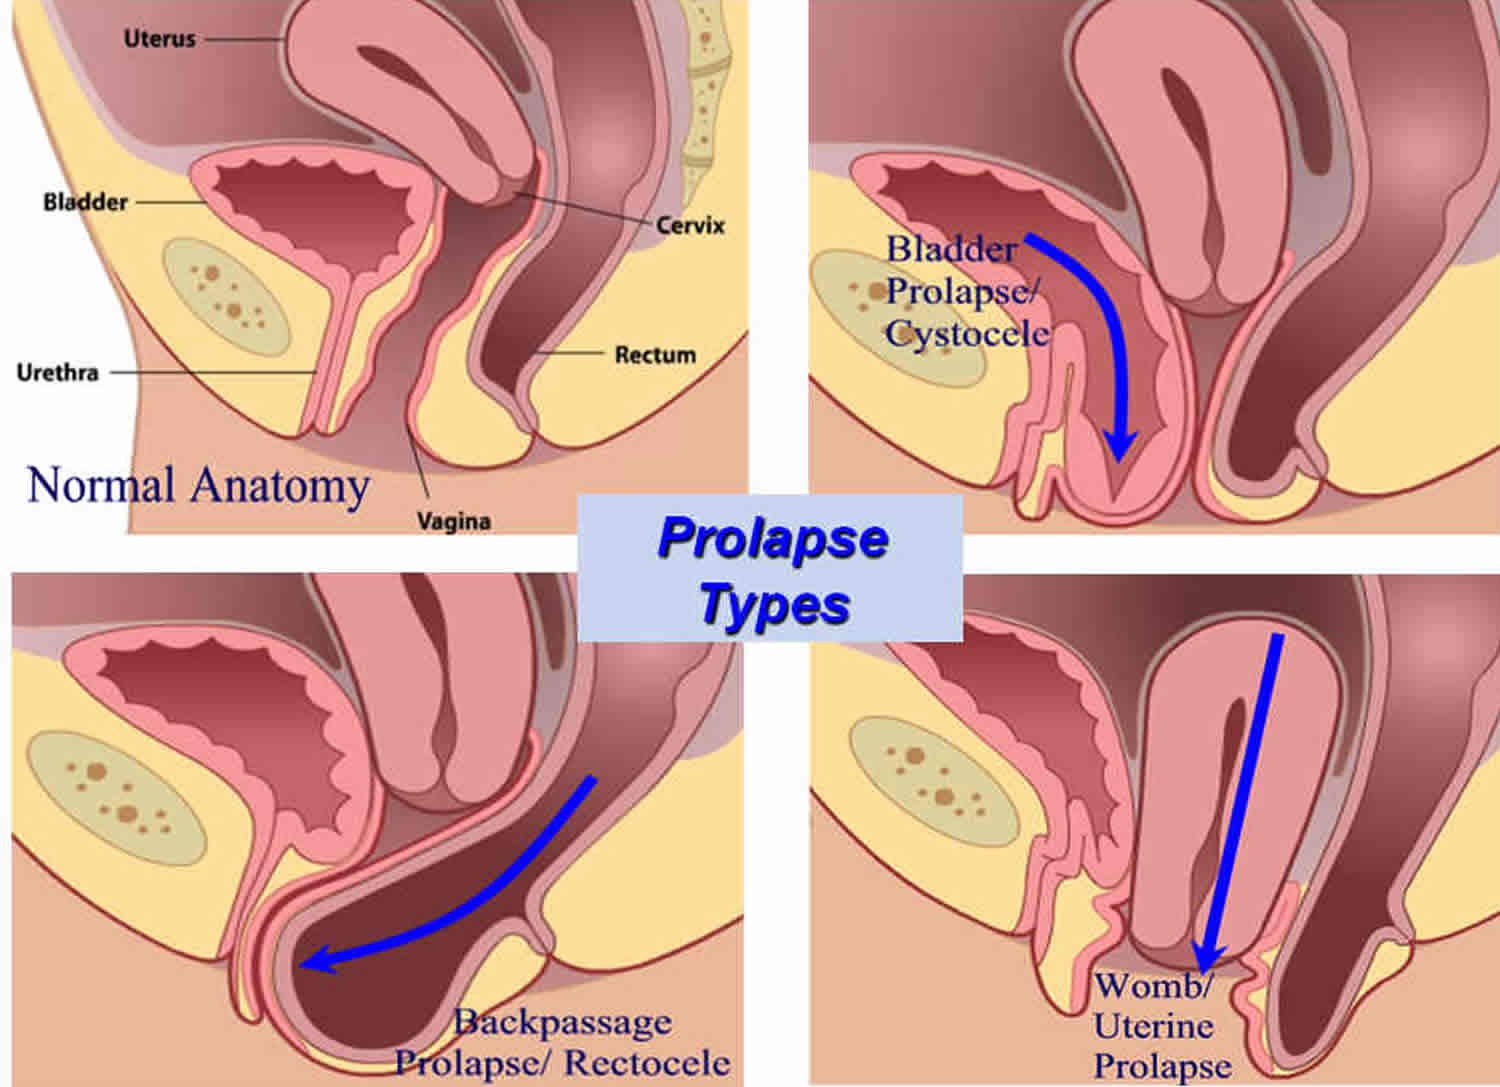 Non-Surgical Approaches to Managing Bladder Problems - Your Pelvic Floor